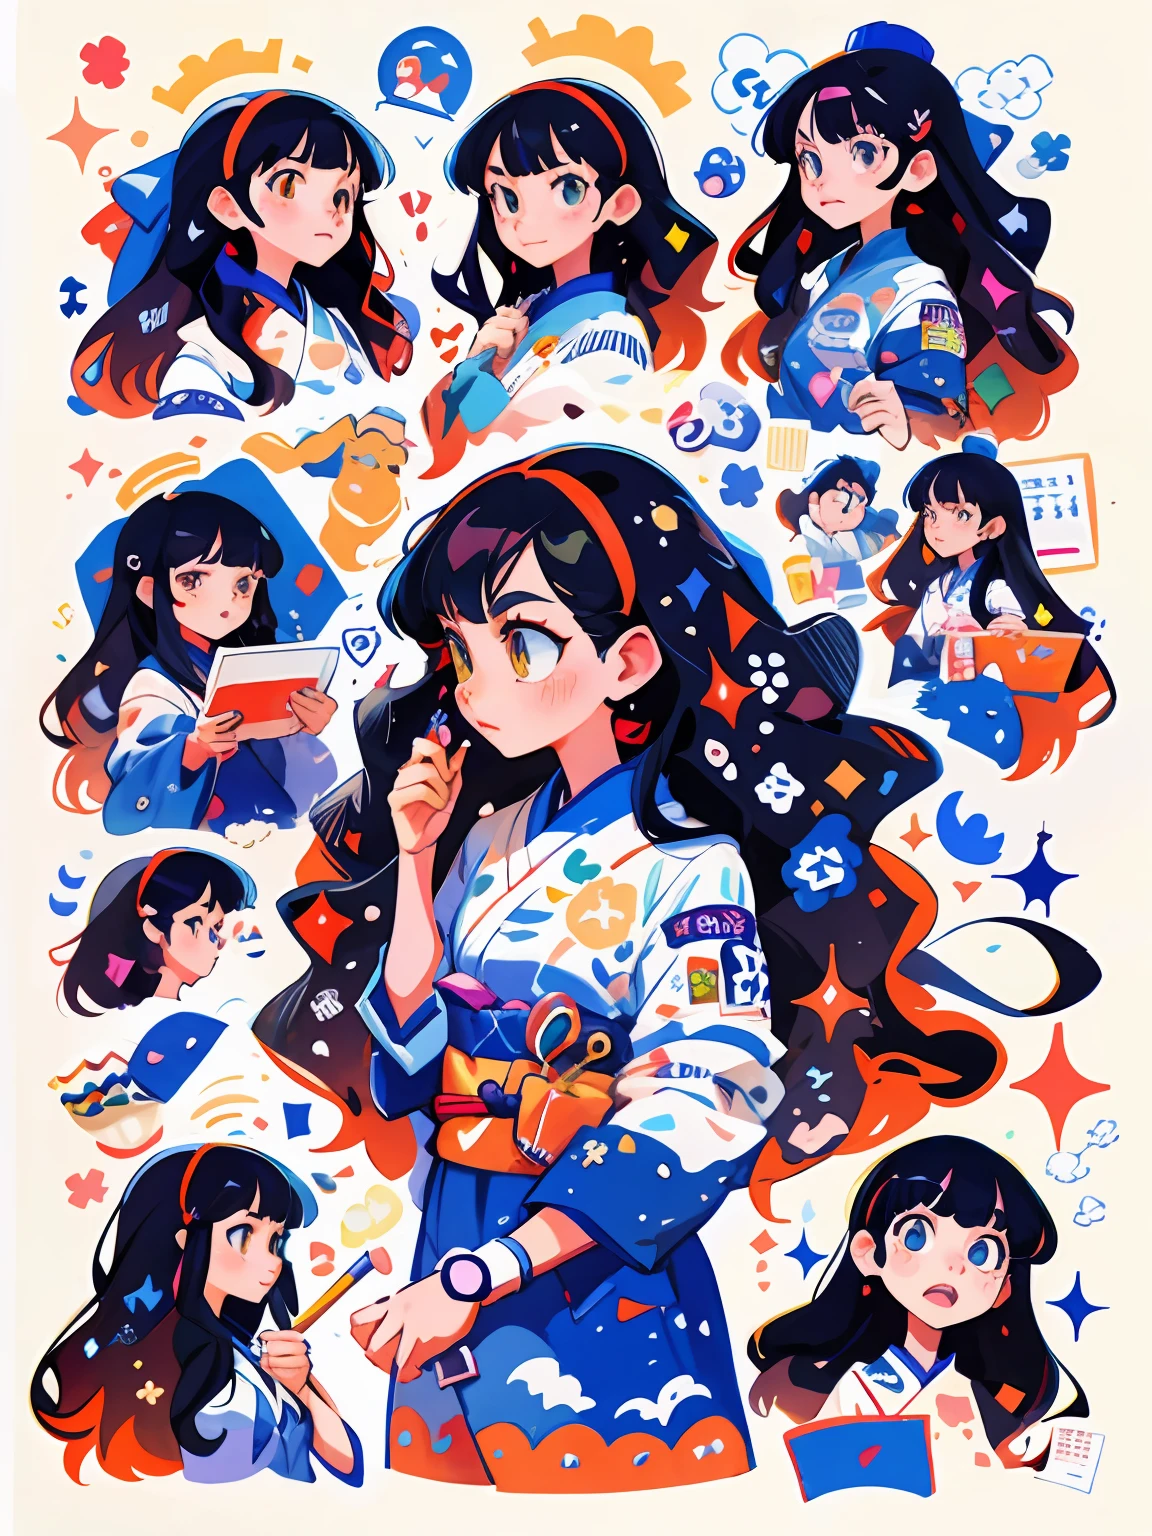 a drawing，A girl with a lot of different expressions on her face,Expressions portray details，Super fine Japanese illustrator, Illustration style, lovely art style, Colorful illustration, Digital anime illustration, Colorful illustrations, cute detailed artwork, cute illustration, Anime style illustration, 2 d illustration, 2 d gouache illustration, 2D illustration, author：Ryan Yee, anime graphic illustration, 2d digital illustration, anime illustration